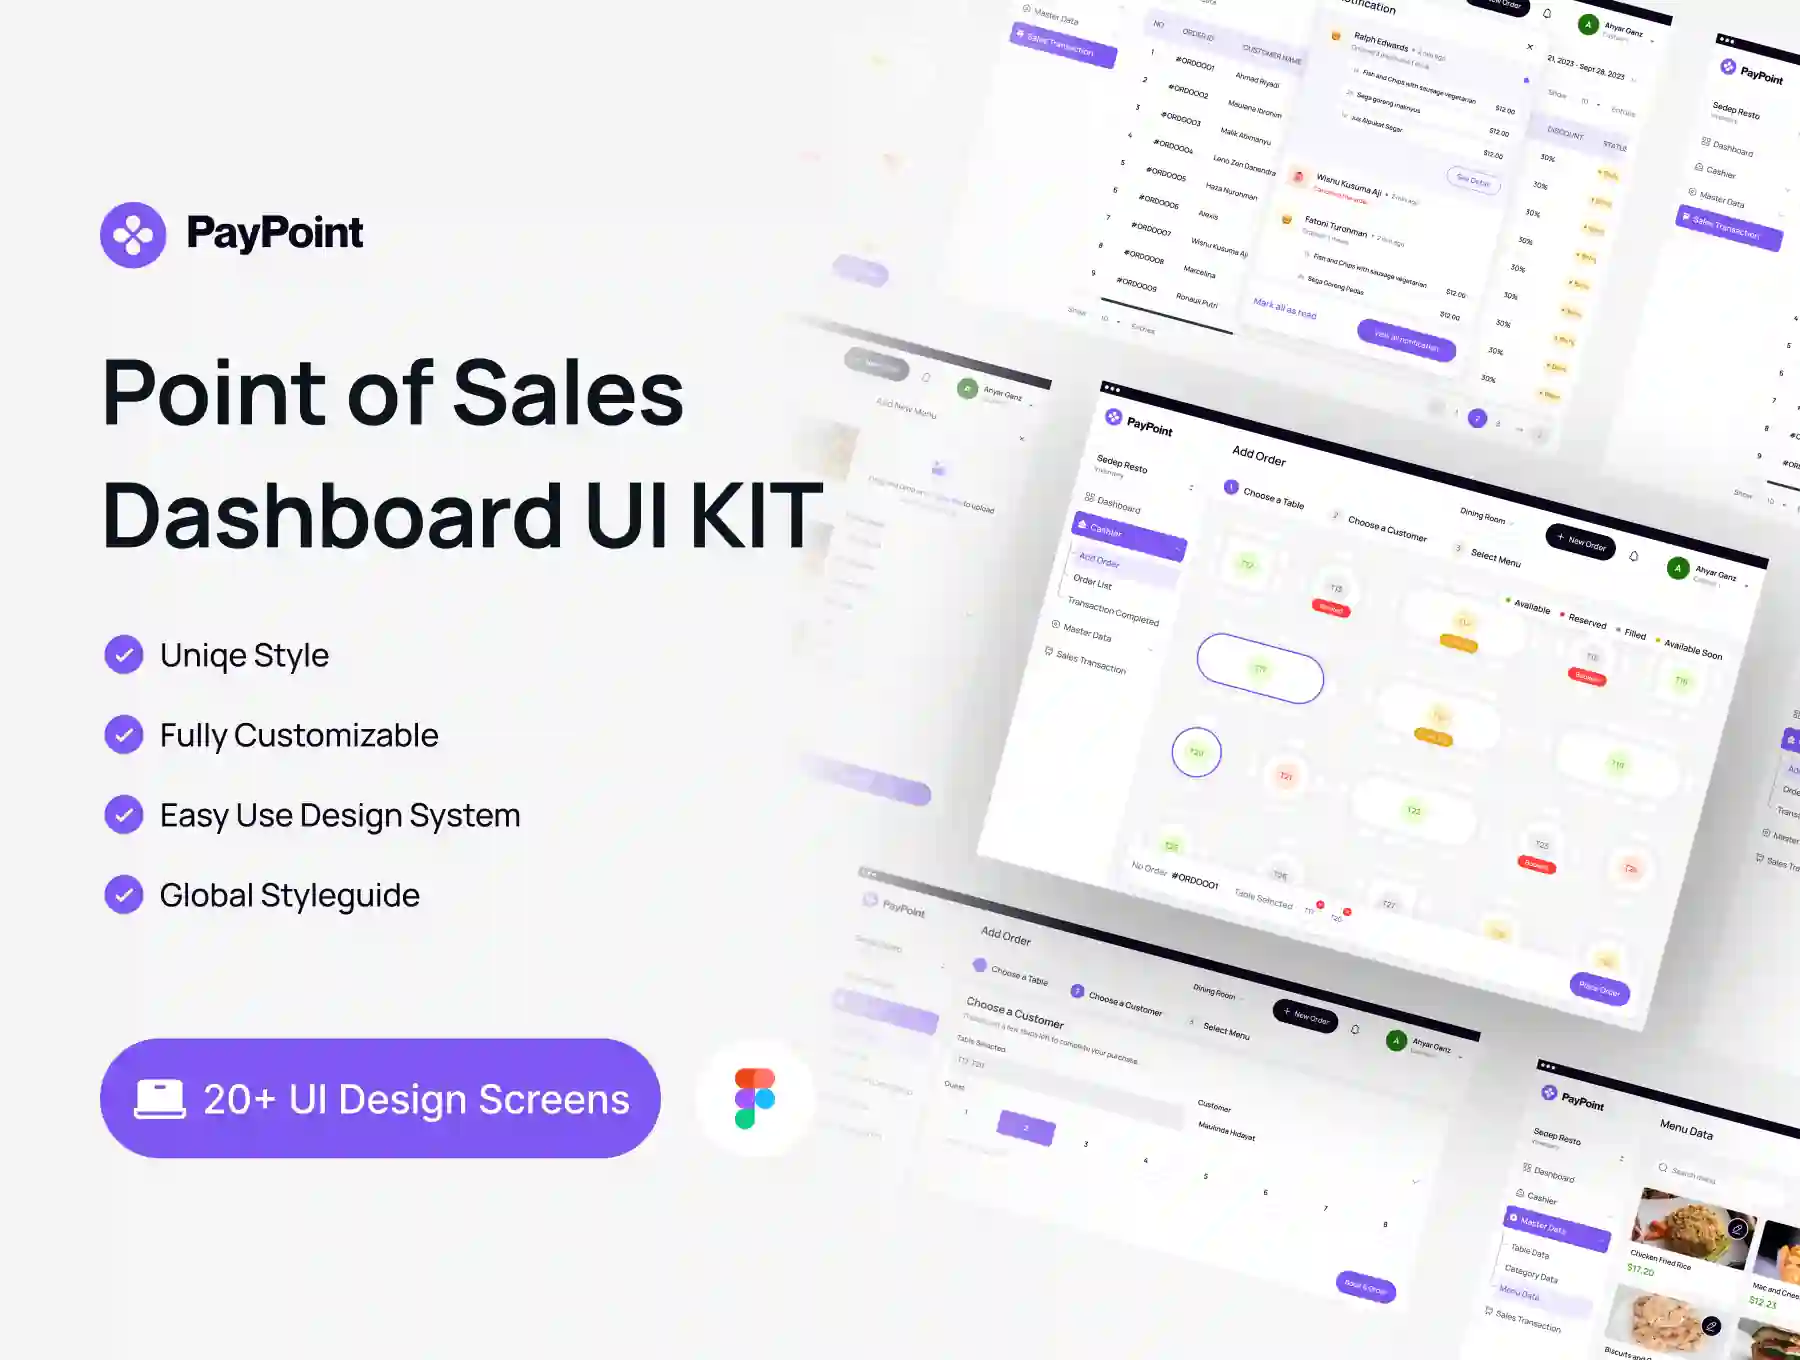 PayPoint - Point of Sales Dashboard UI KIT